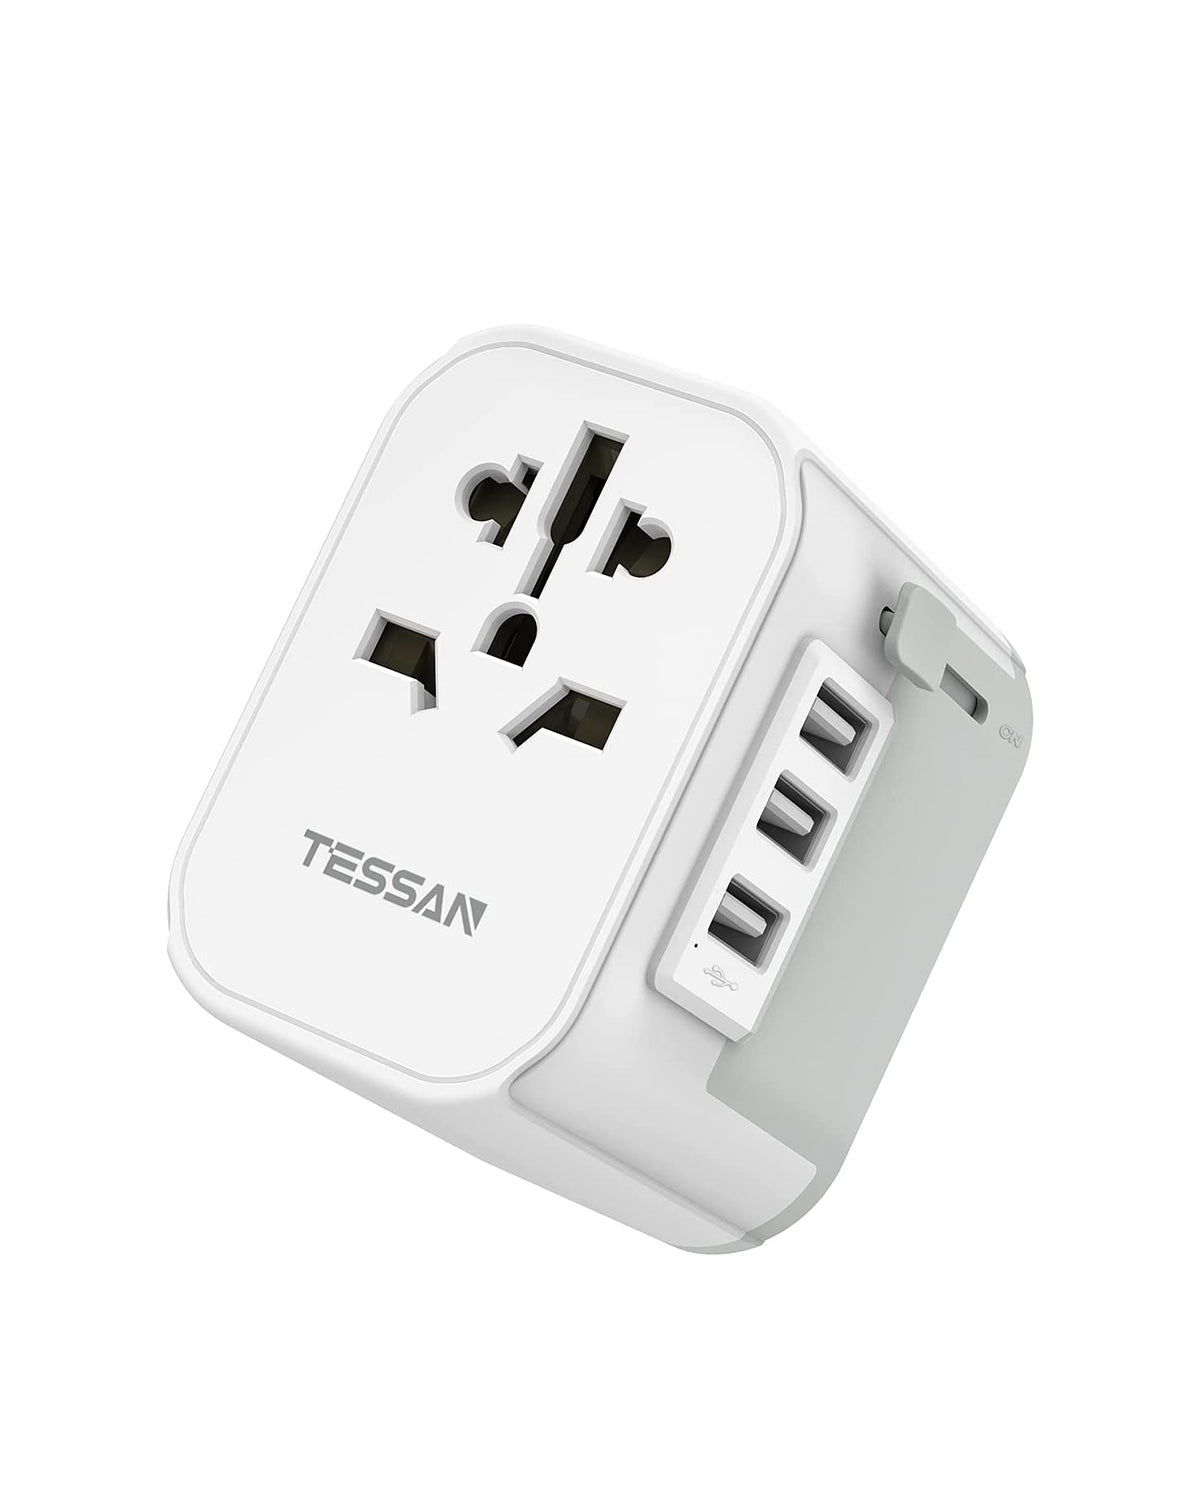 Universal Travel Adapter with 3 USB